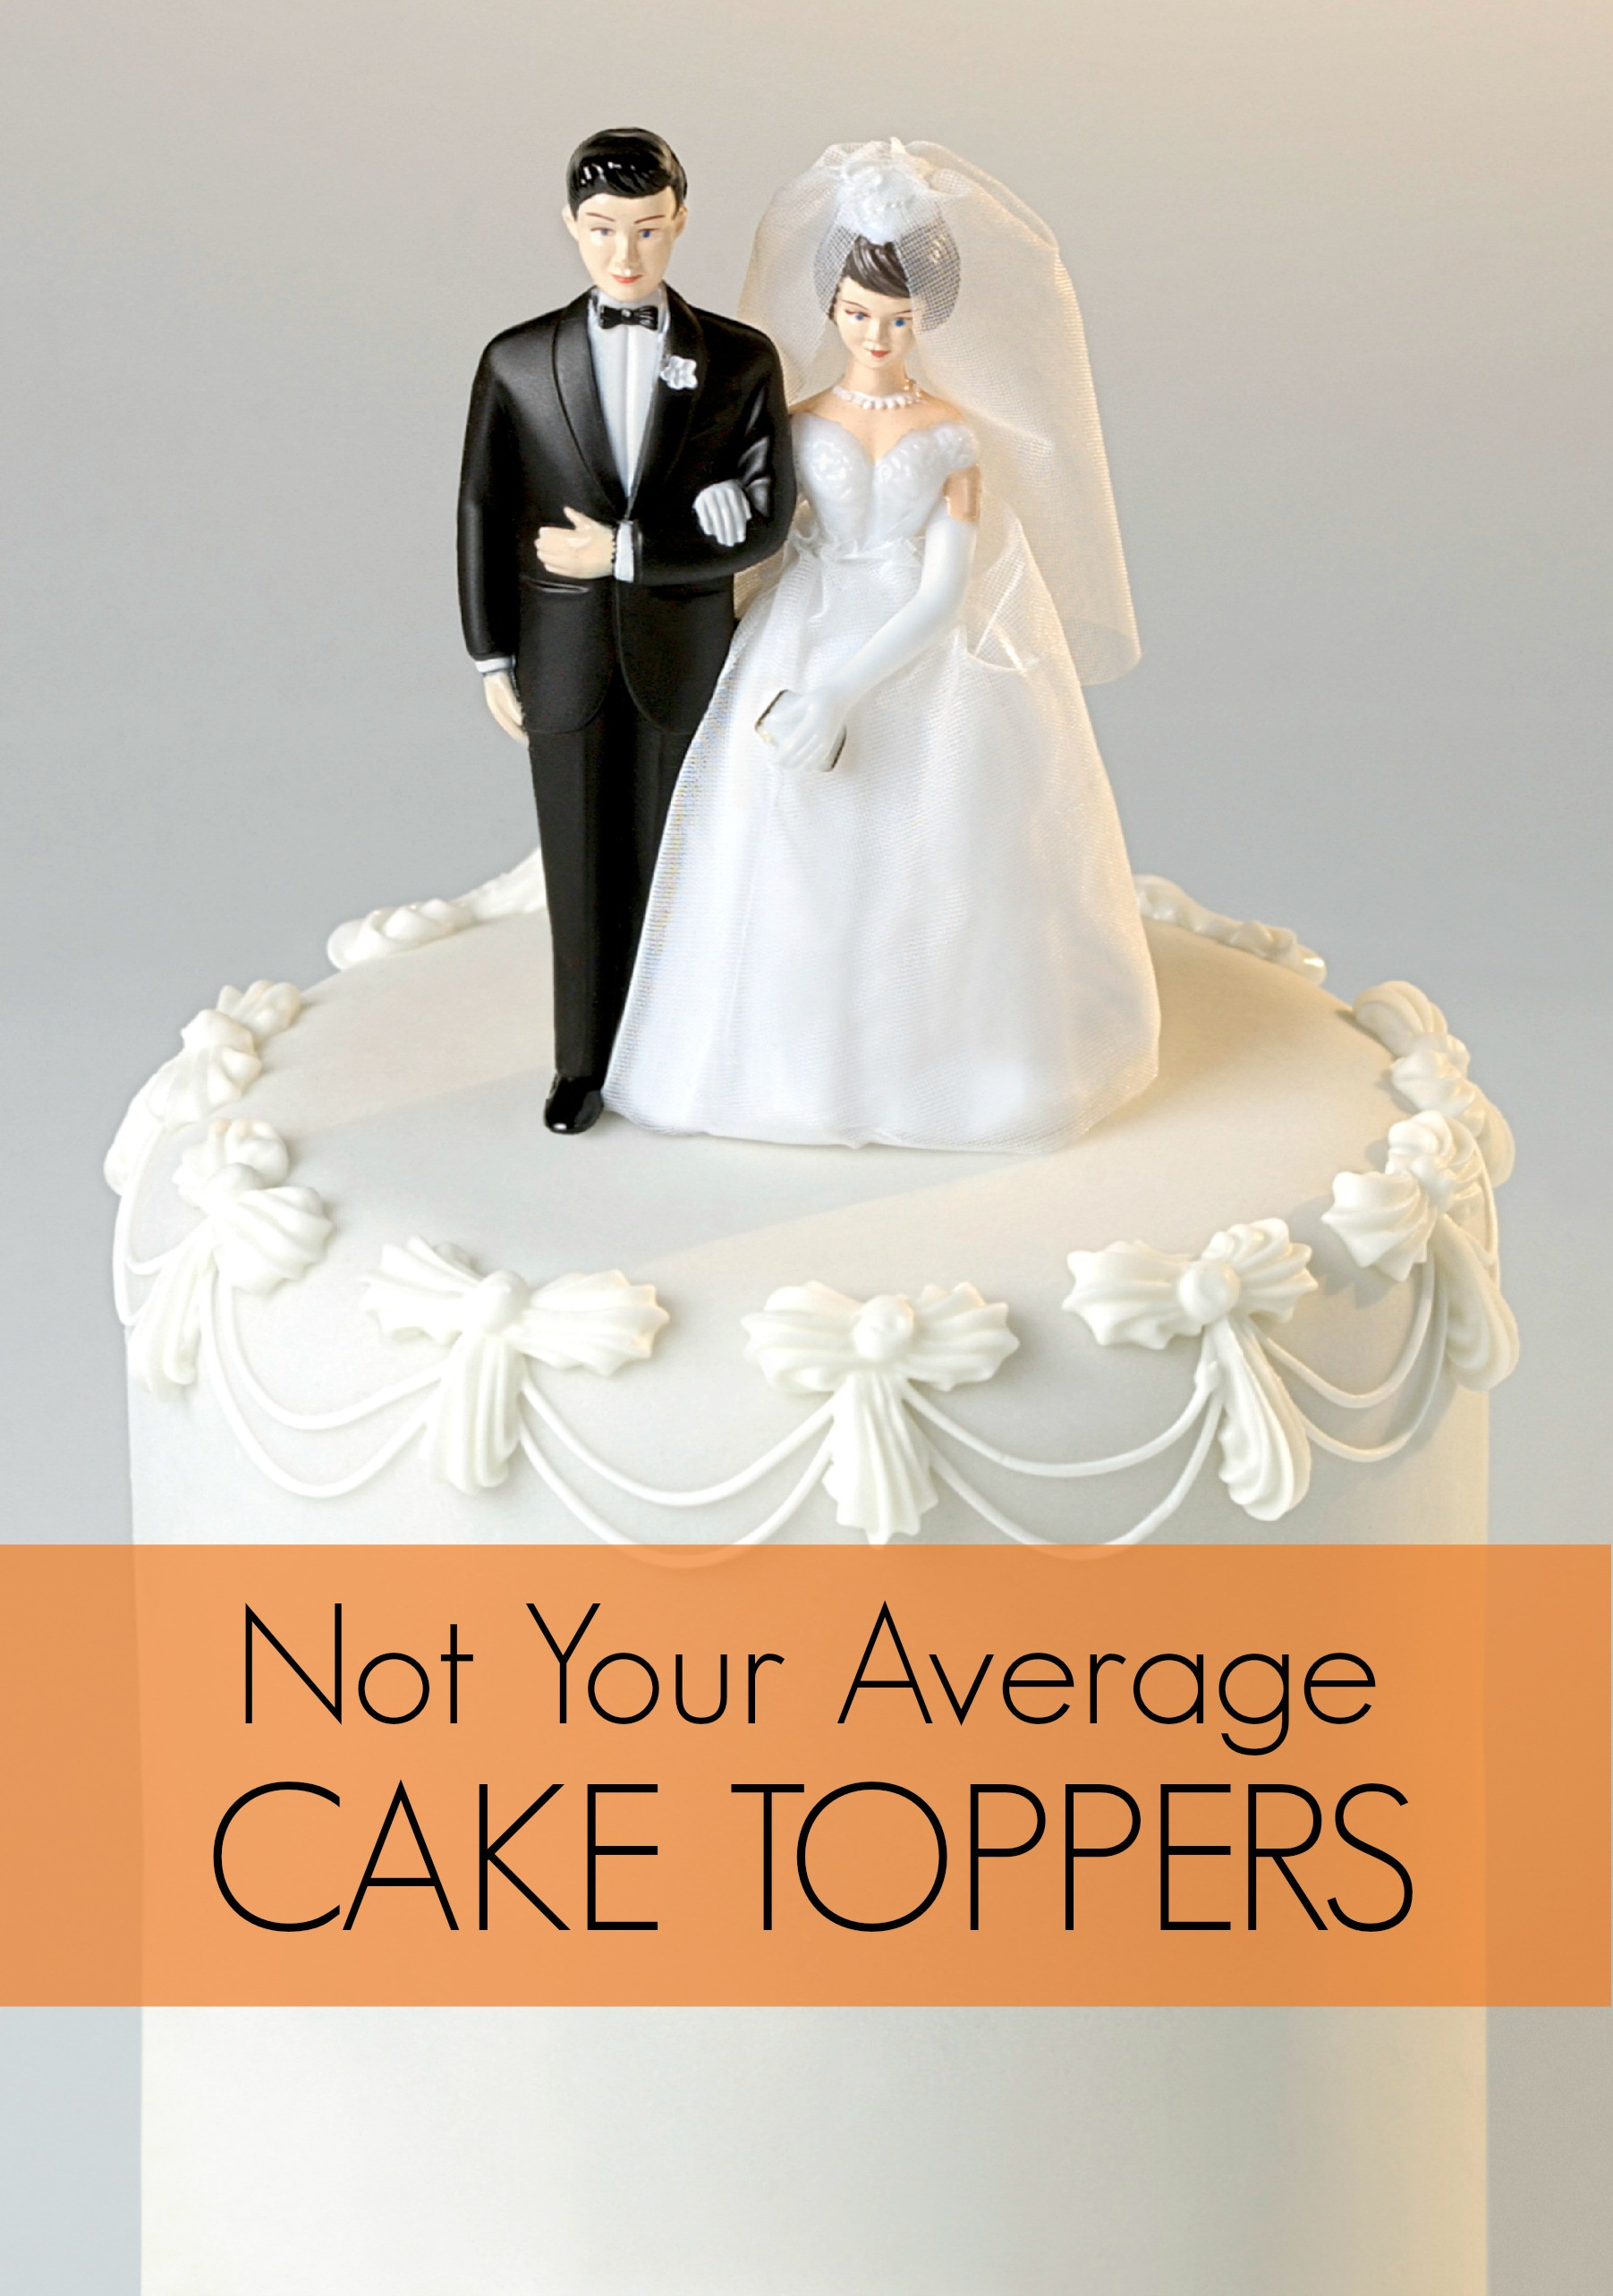 Wedding Cakes Toppers
 Not Your Average Cake Toppers